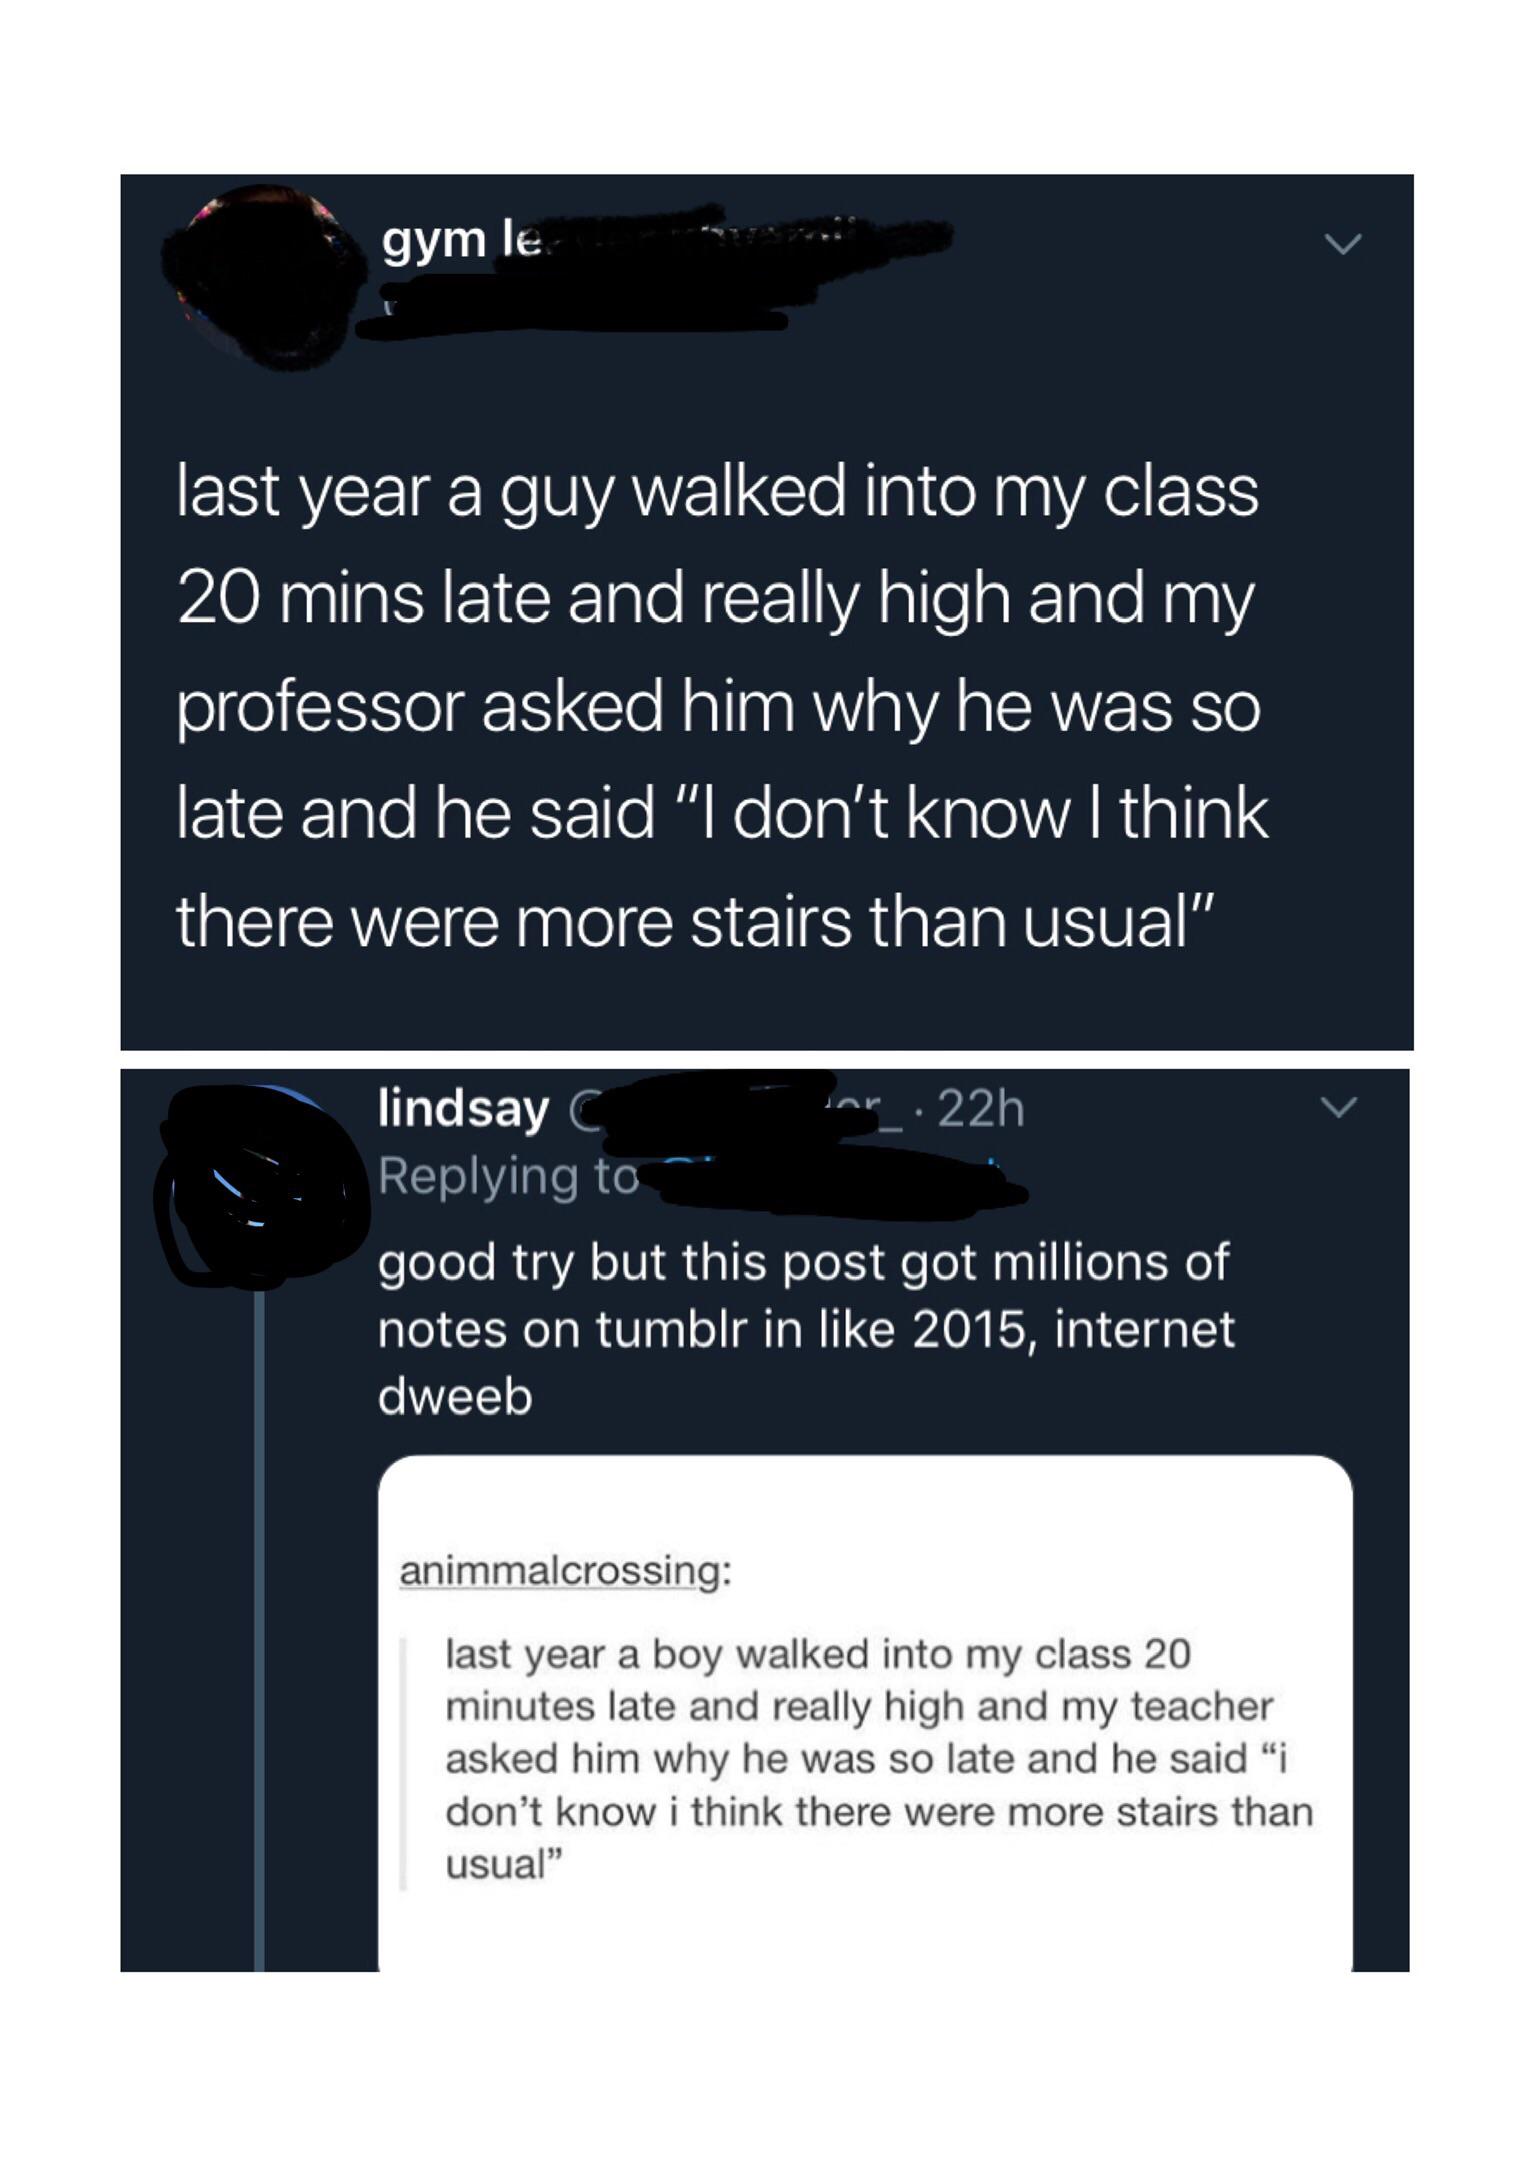 multimedia - gym le last year a guy walked into my class 20 mins late and really high and my professor asked him why he was so late and he said "I don't know I think there were more stairs than usual" lindsay C ar 22h good try but this post got millions o